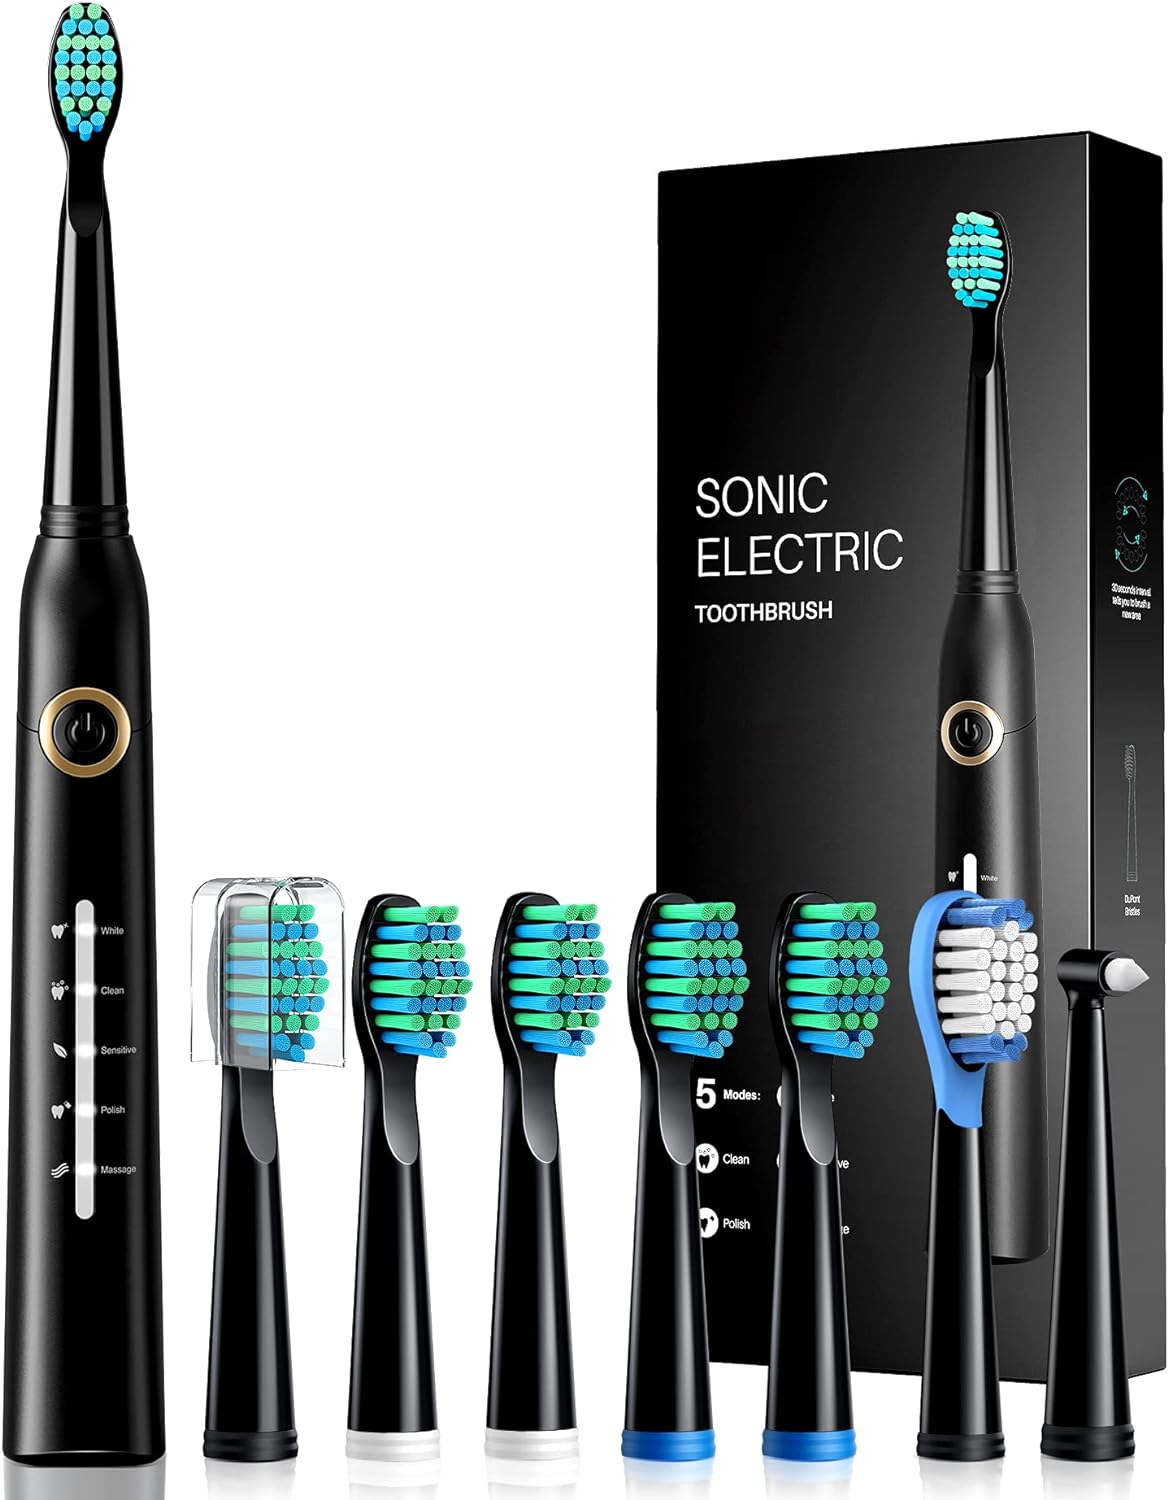 ATMOKO Electric Toothbrush, Greamo Sonic Electric Toothbrushes with 8 Brush Heads, 5 Modes, 40000 VPM Power Rechargeable Toothbrushes for Adults - image 1 of 8